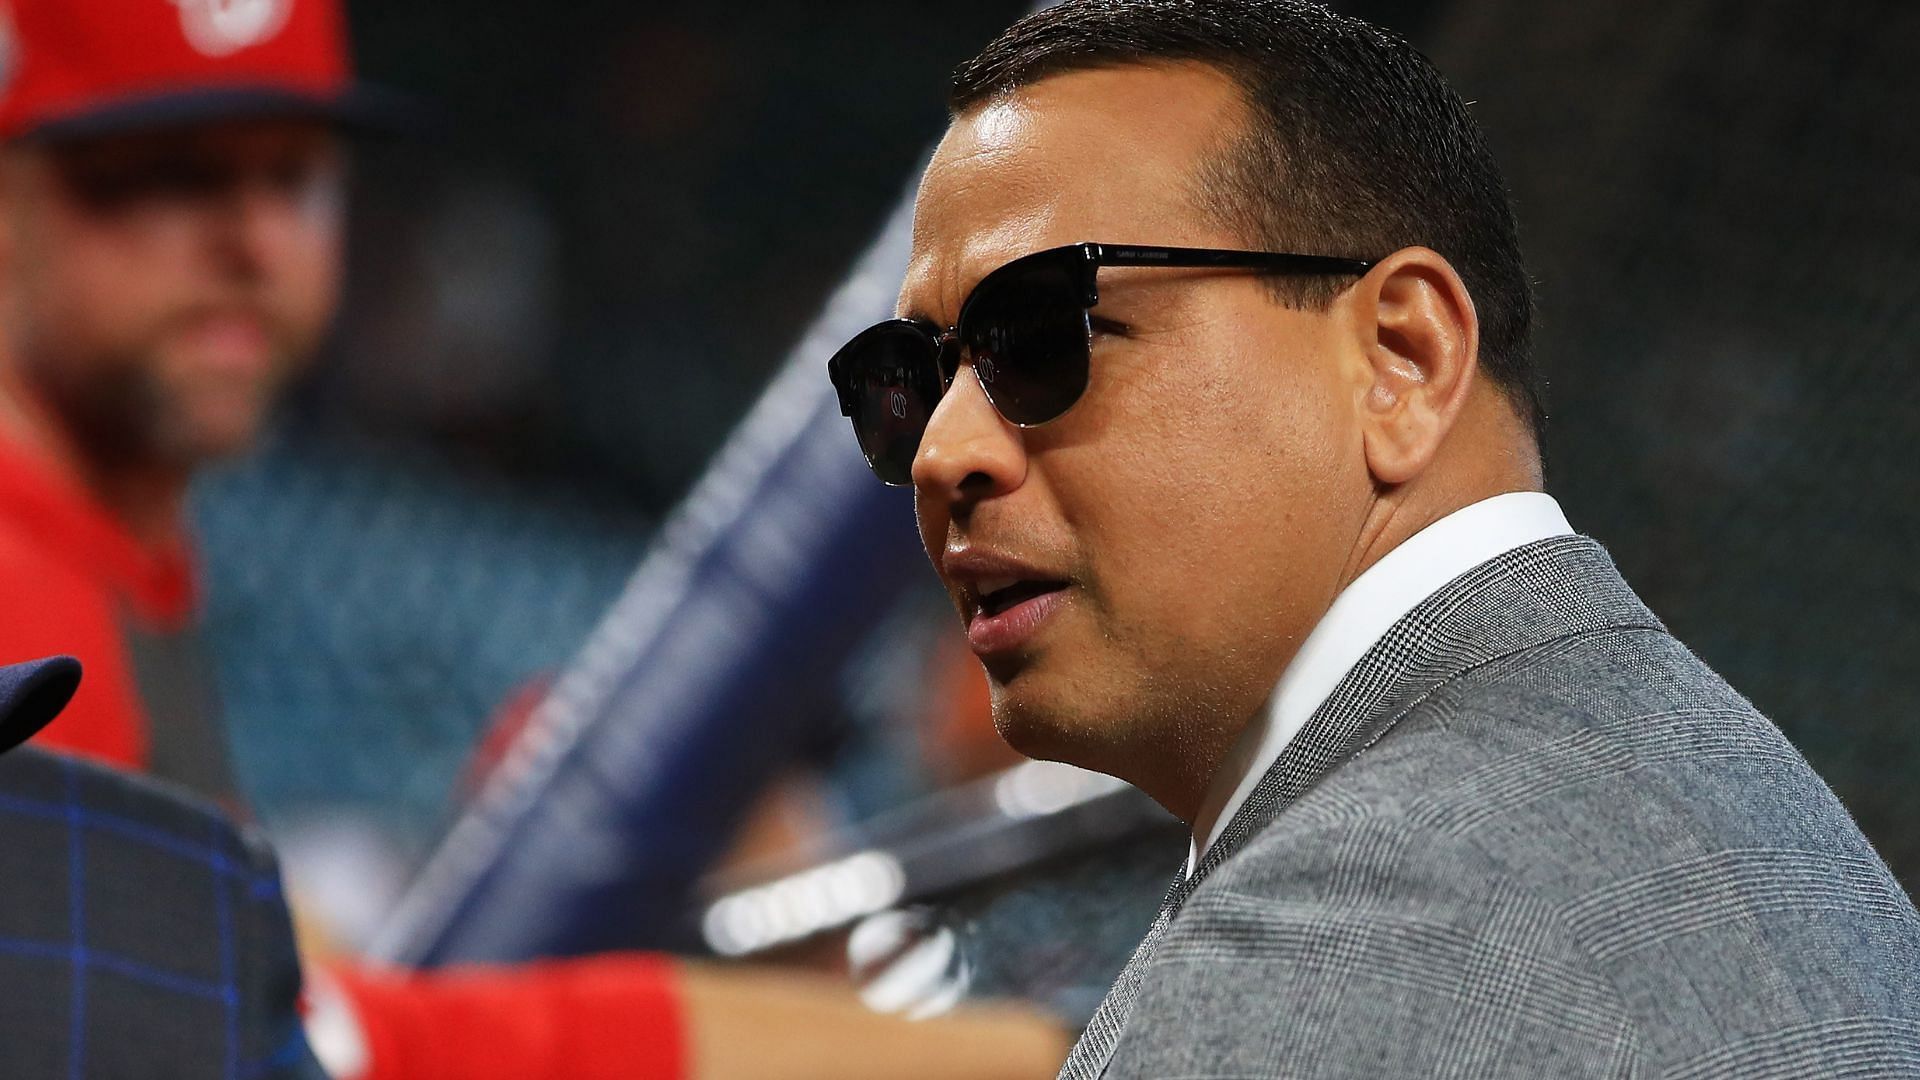 A-Rod has been prominent in the entrepreneurial world since leaving the NY Yankees in 2016.